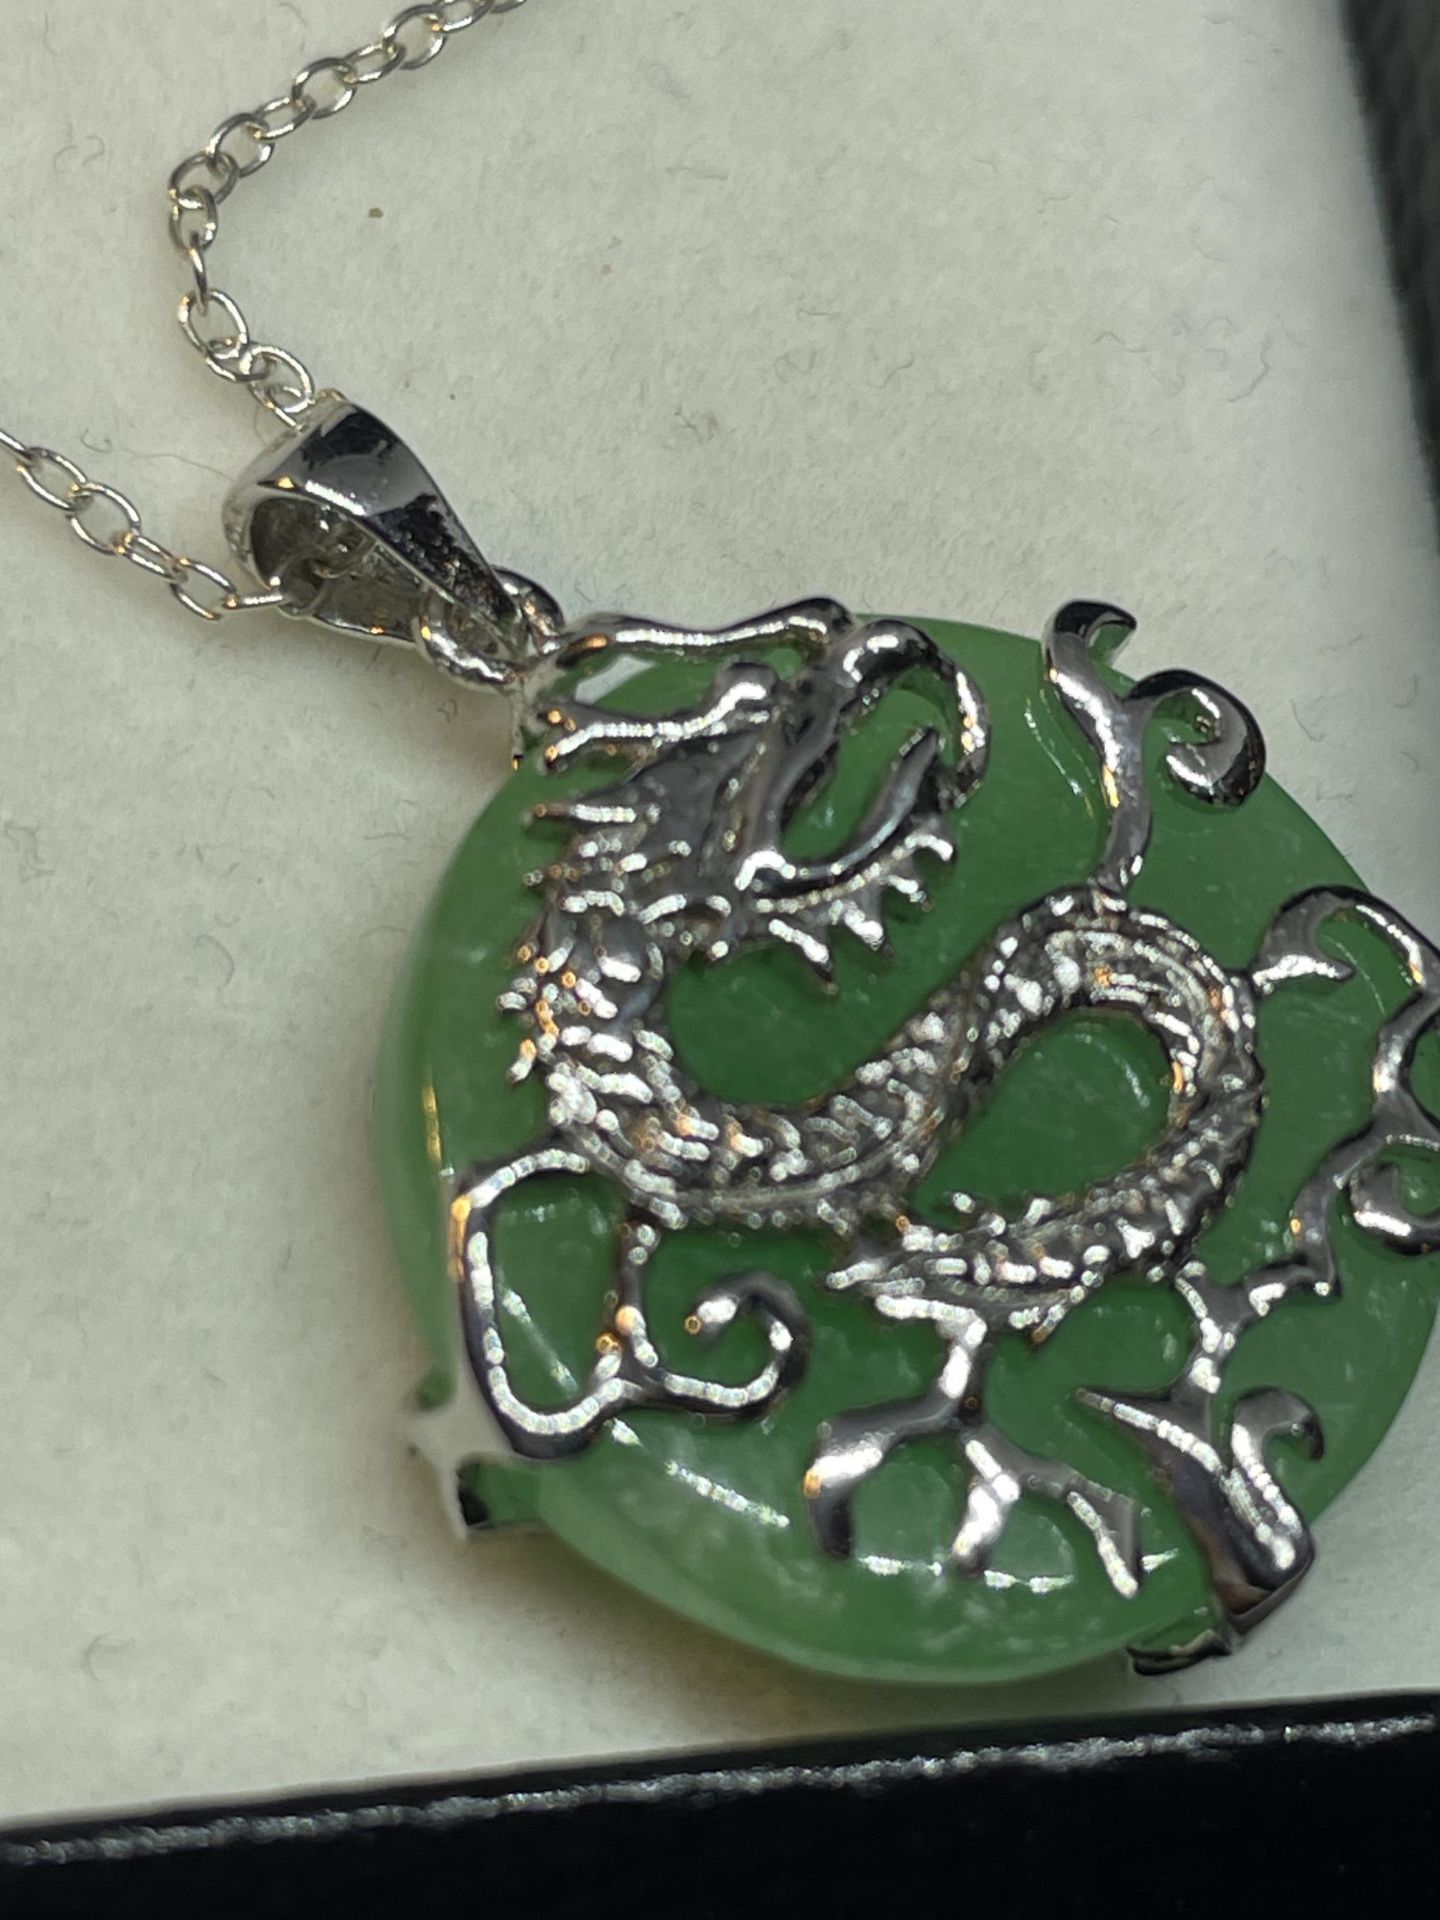 A SILVER AND JADE NECKLACE IN A PRESENTATION BOX - Image 3 of 3